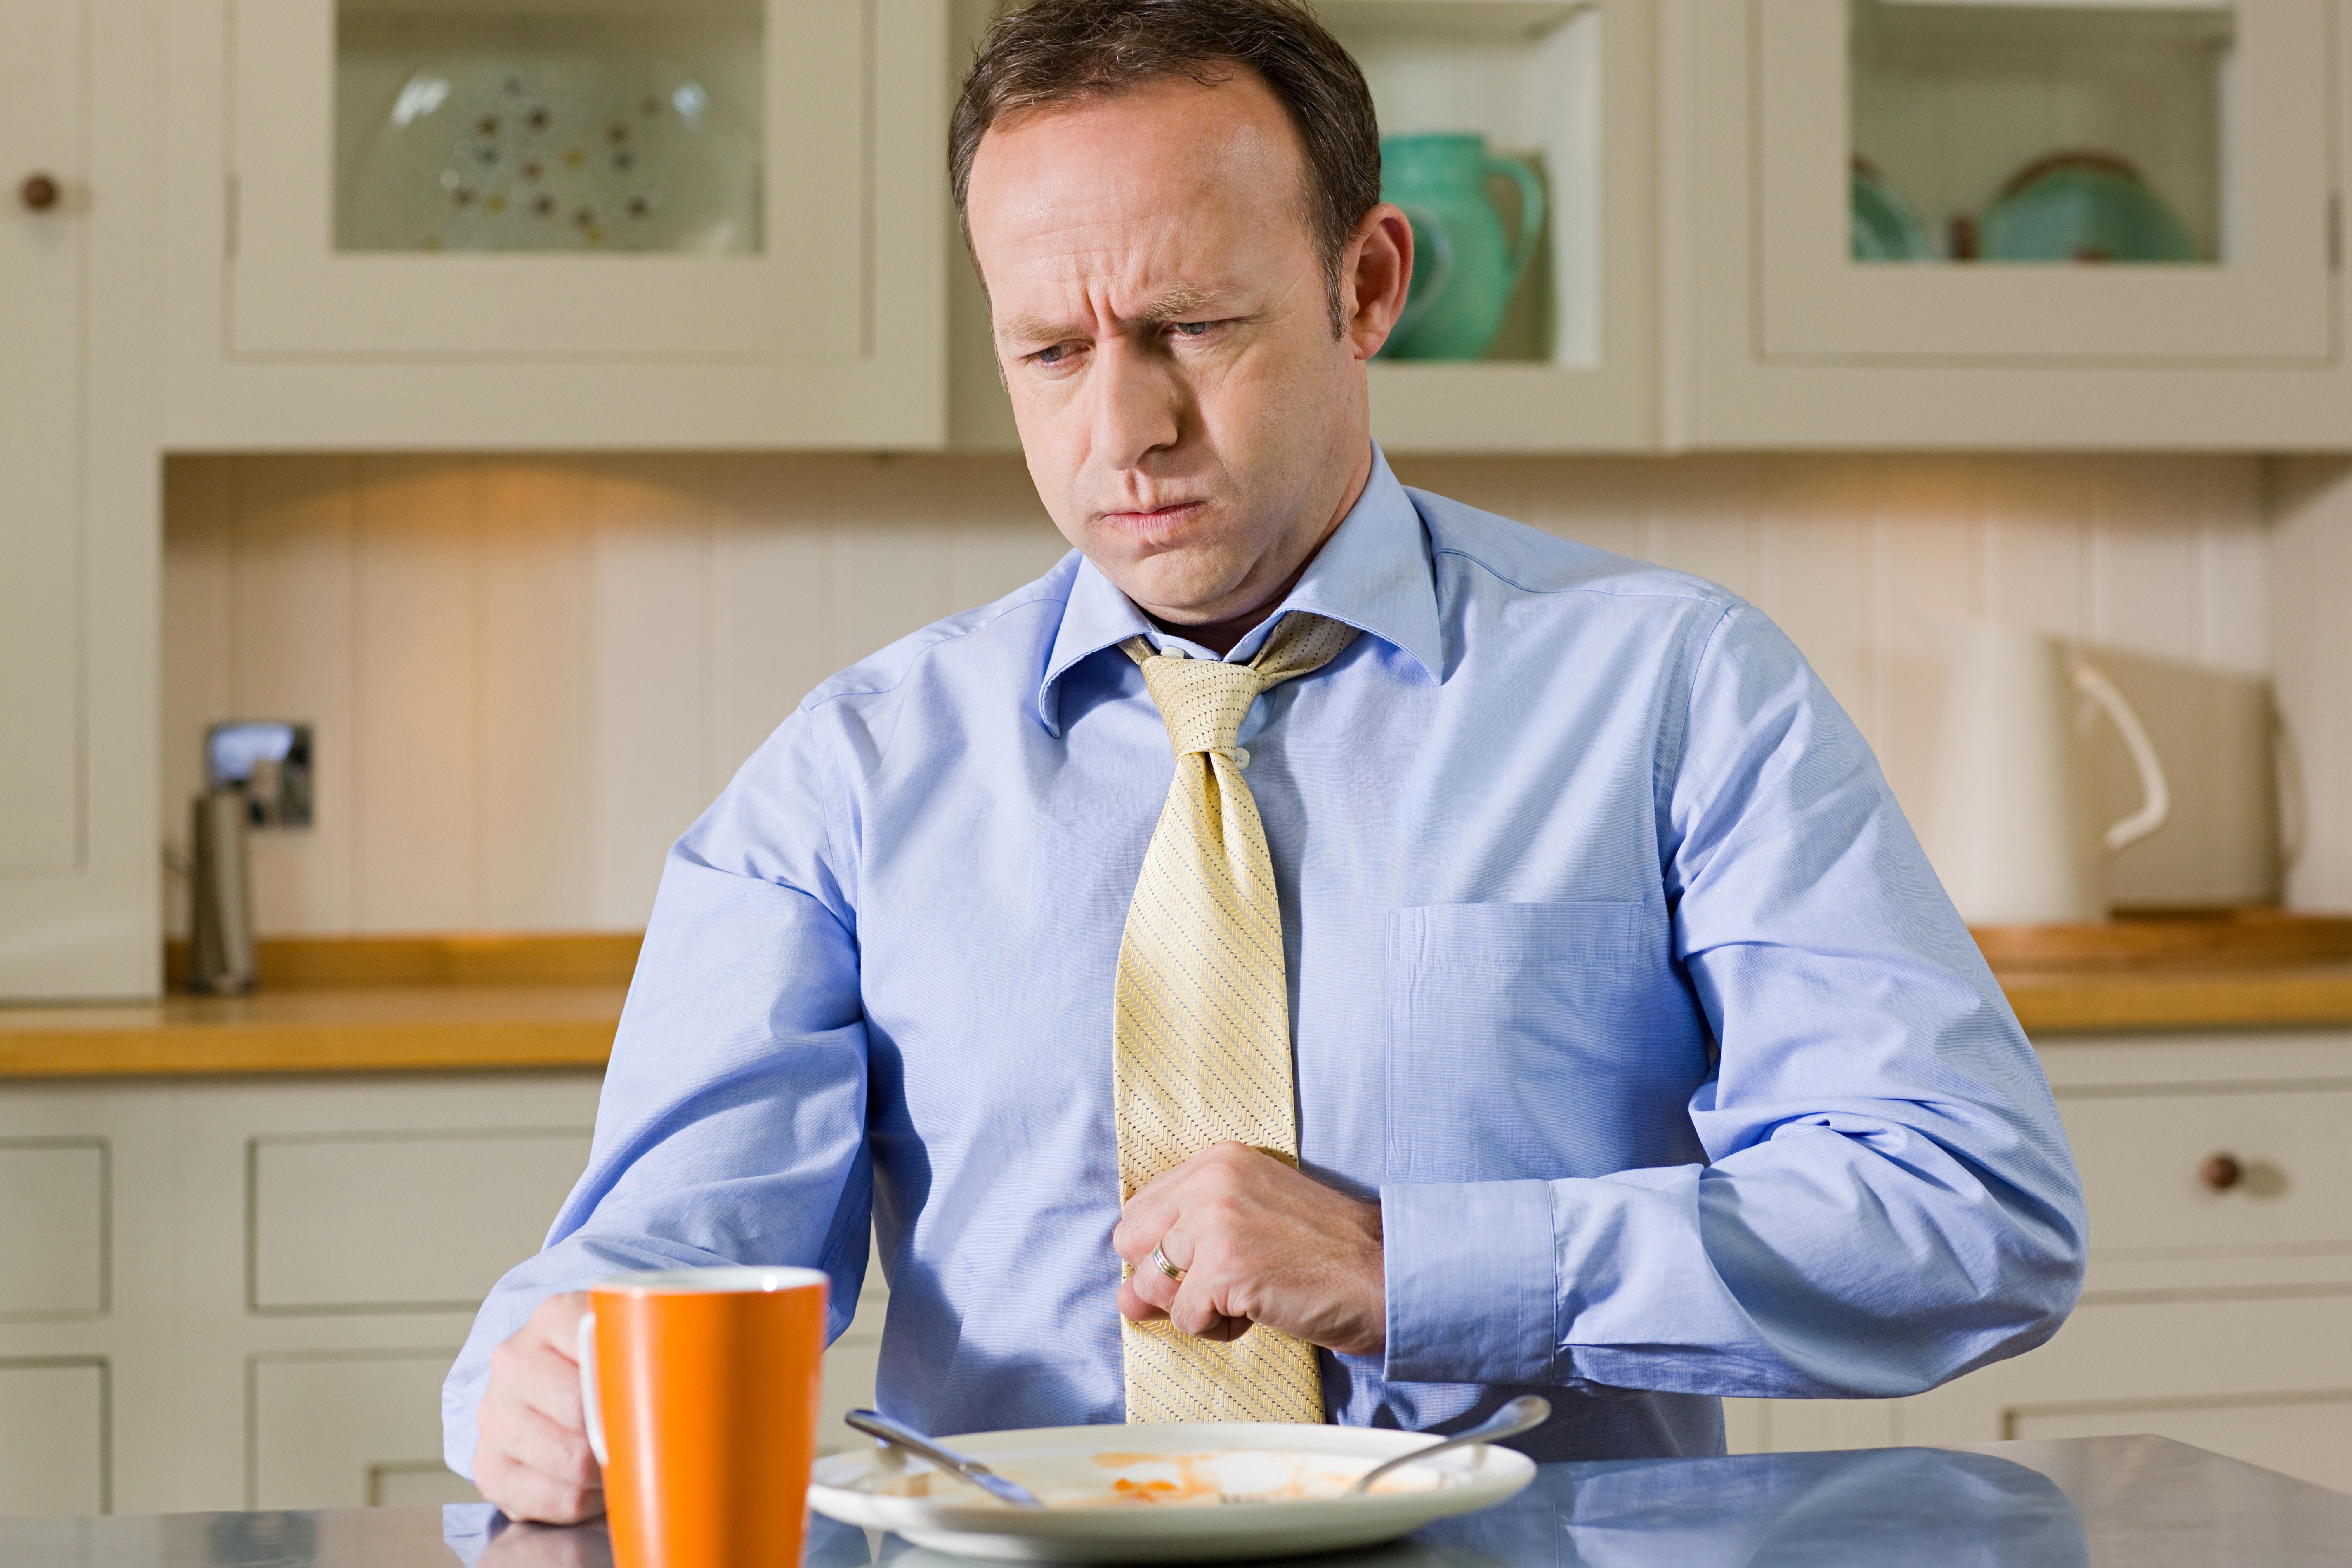 Things you need to know about coeliac disease